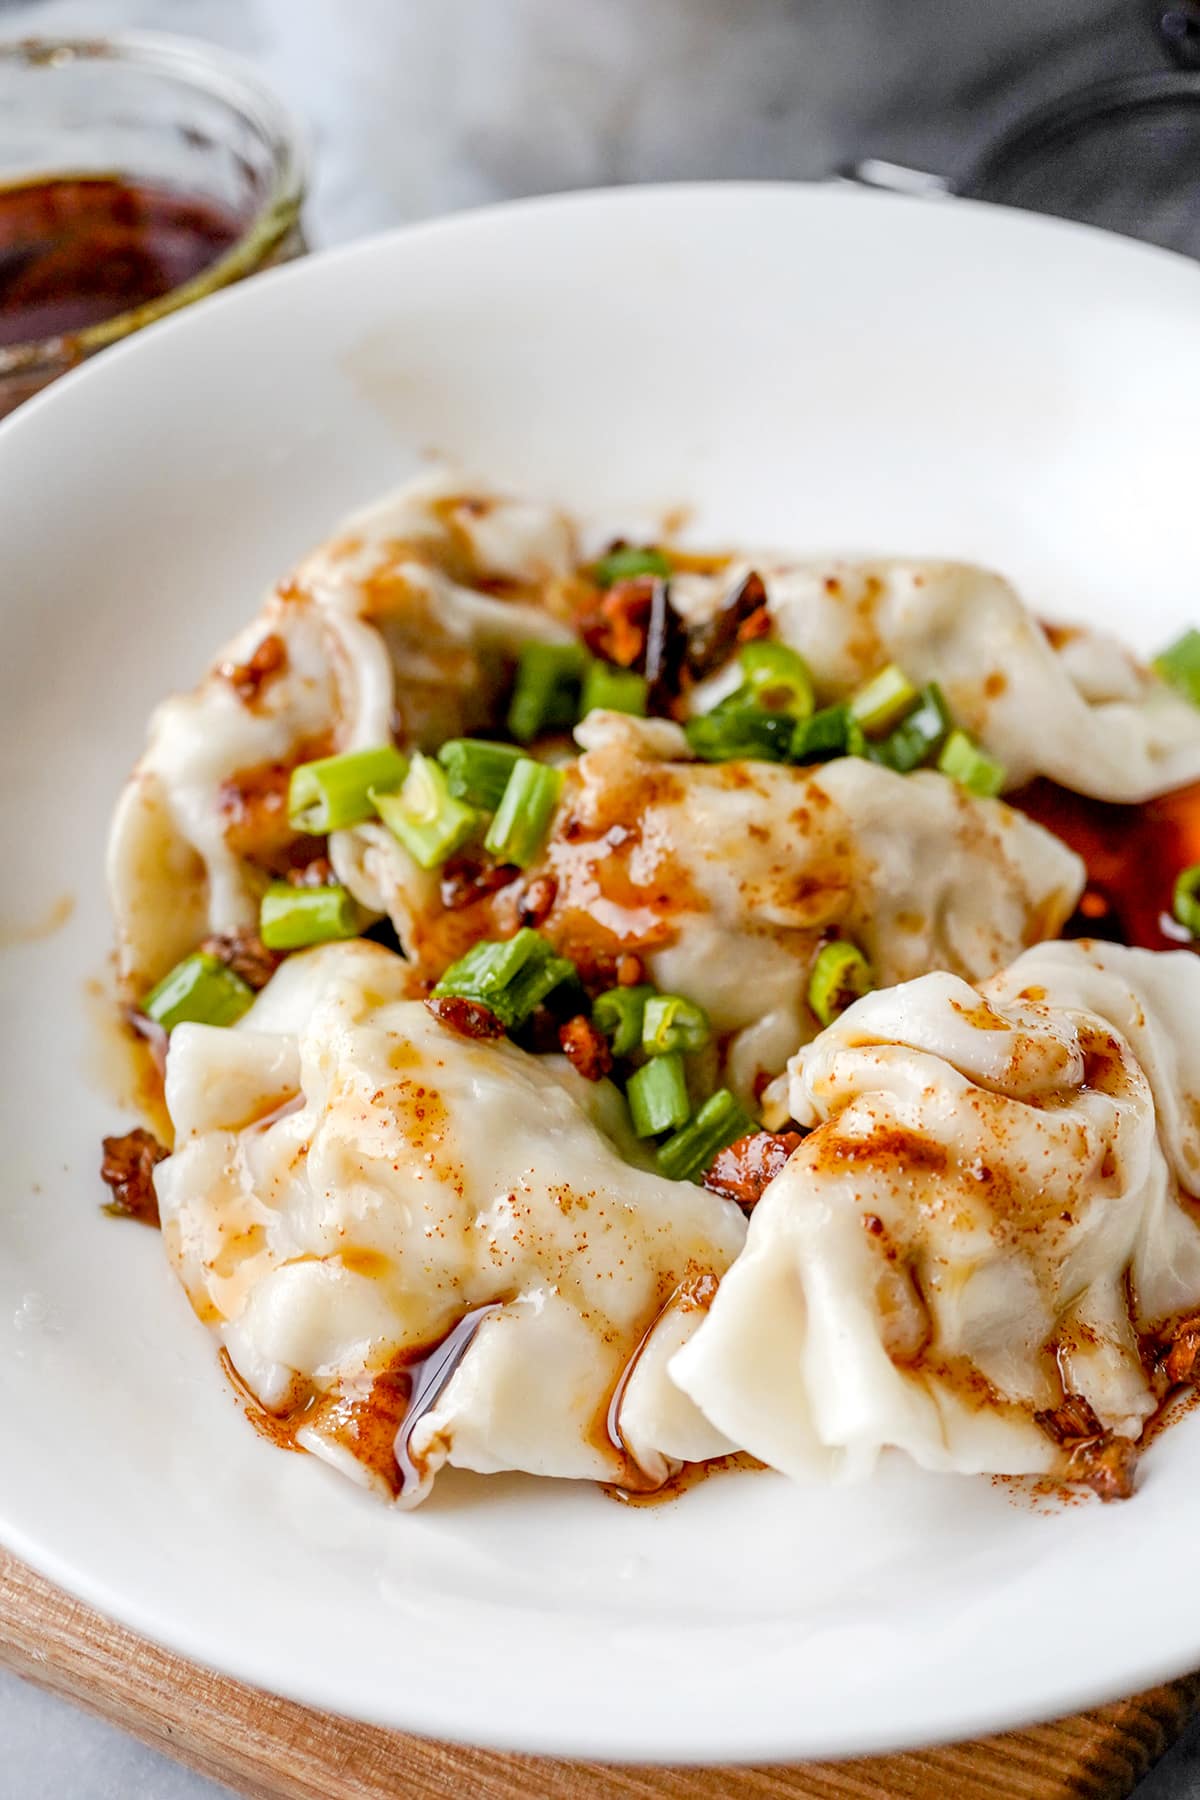 Potstickers cooked in the Instant Pot